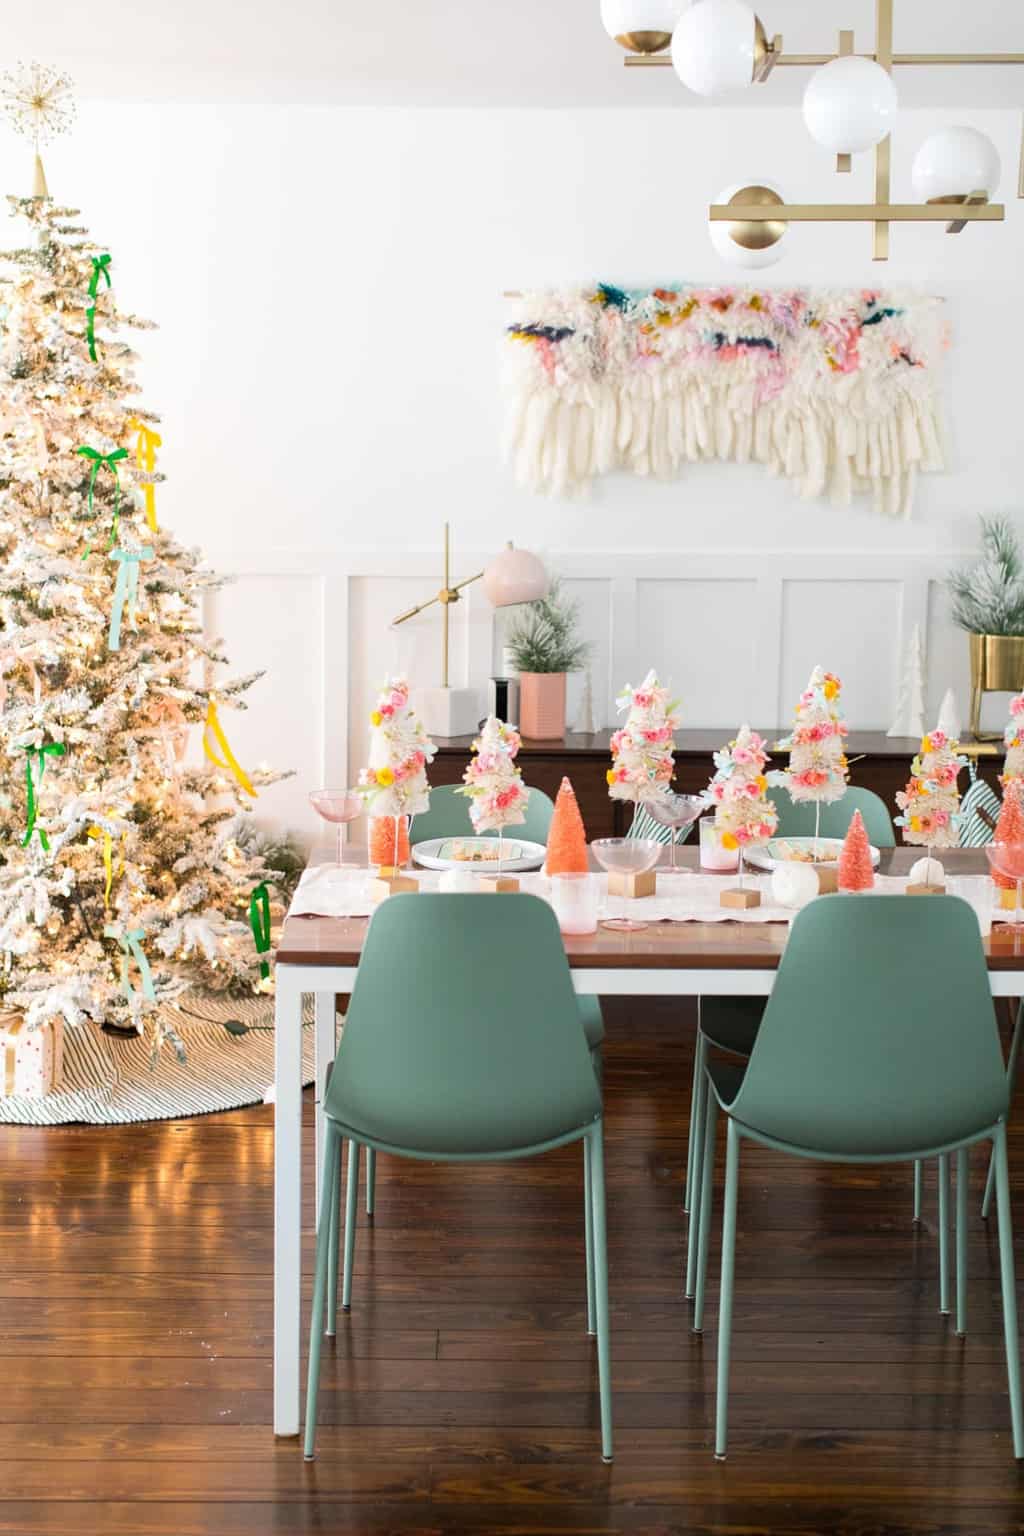 a cozy Christmas dinner table setting - Faux Flower Bottle Brush Tree DIY Christmas Centerpiece Idea by top Houston lifestyle blogger Ashley Rose of Sugar and Cloth #diy #christmas #decor #howto #craft #entertaining #centerpiece #ideas